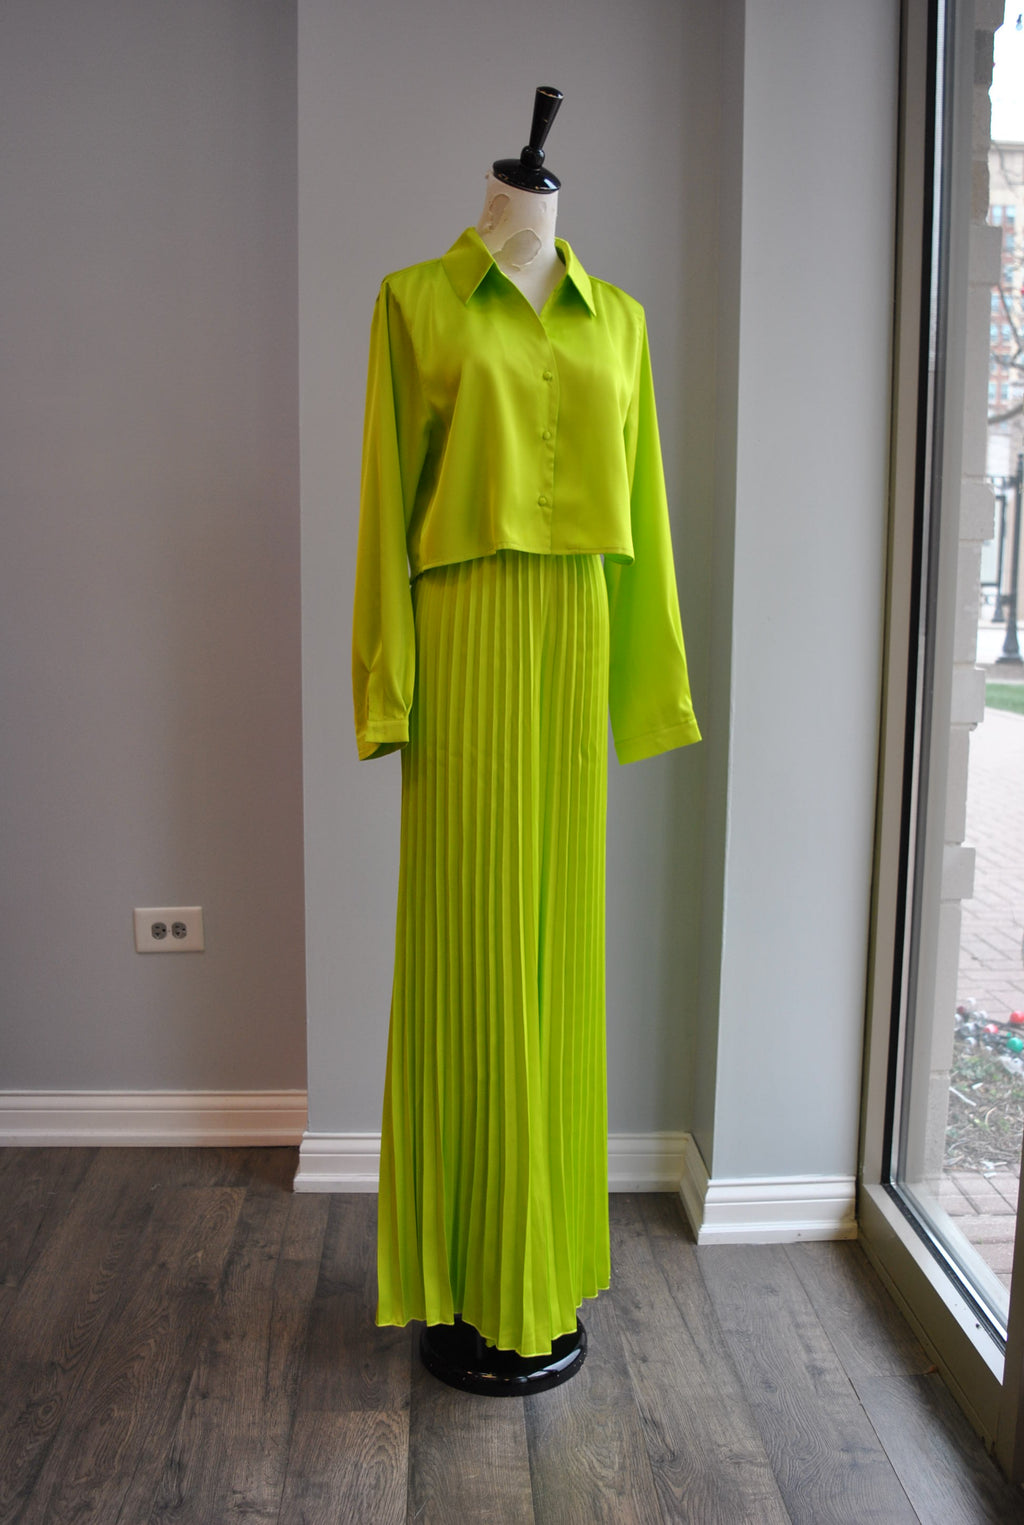 NEON GREEN SET OF PALAZZO PANST AND CROPPED TOP - RESORT COLLECTION